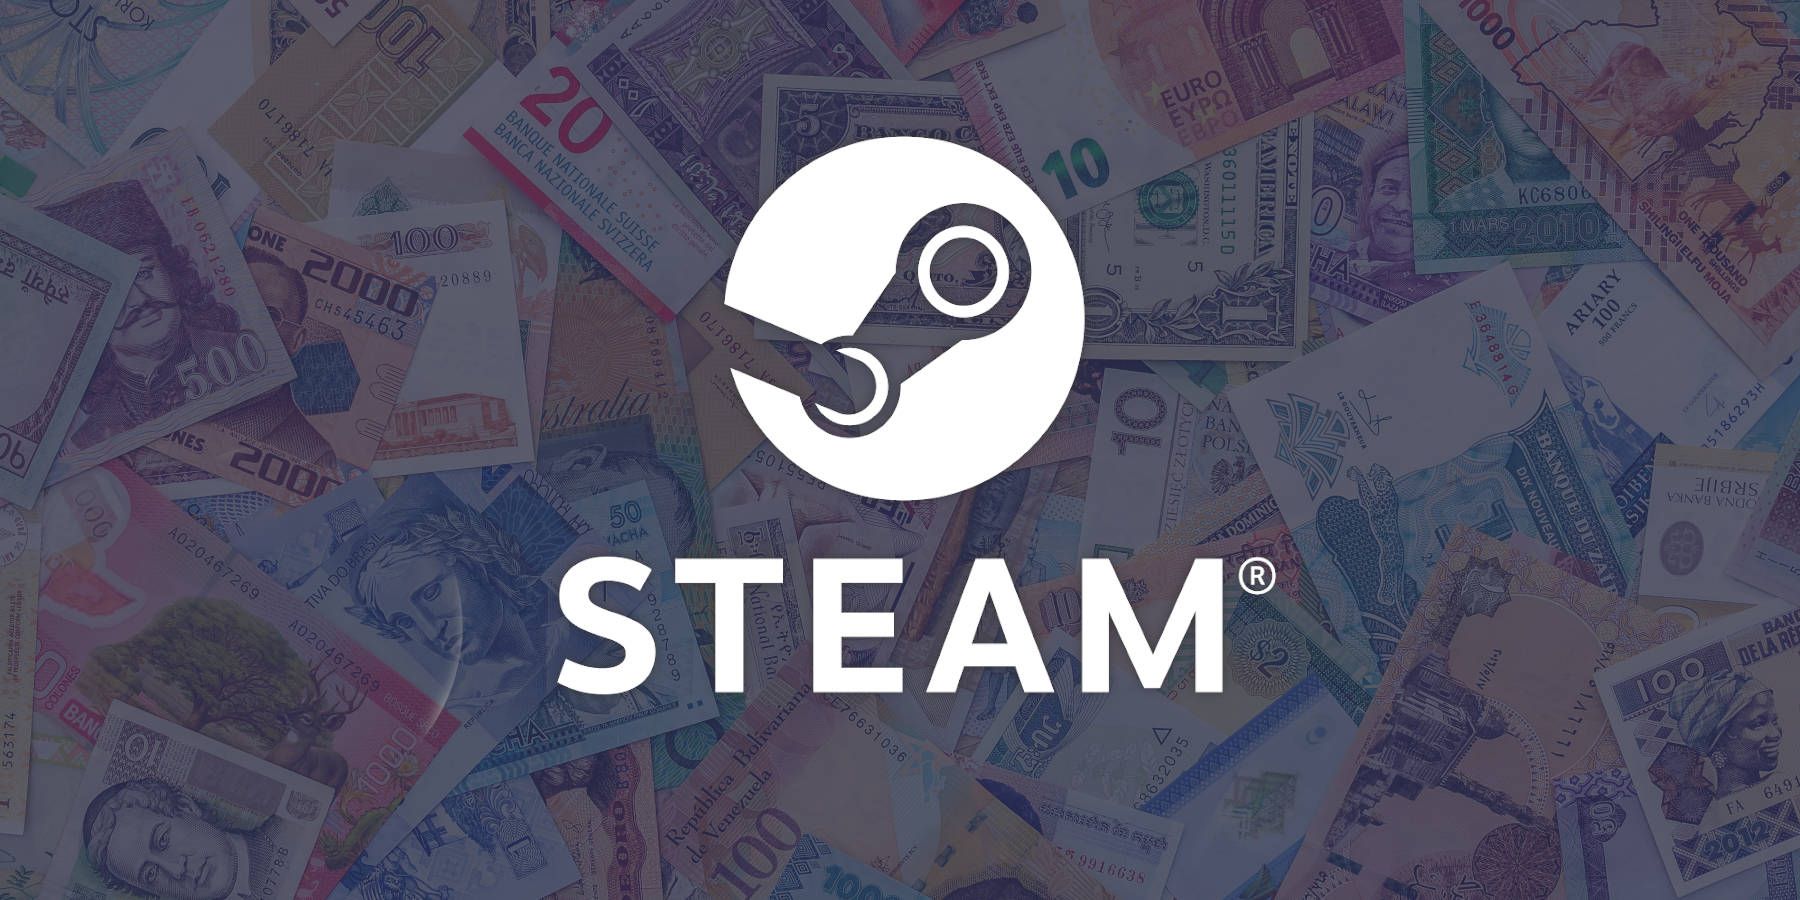 Note that is not affiliated with steam or valve фото 44